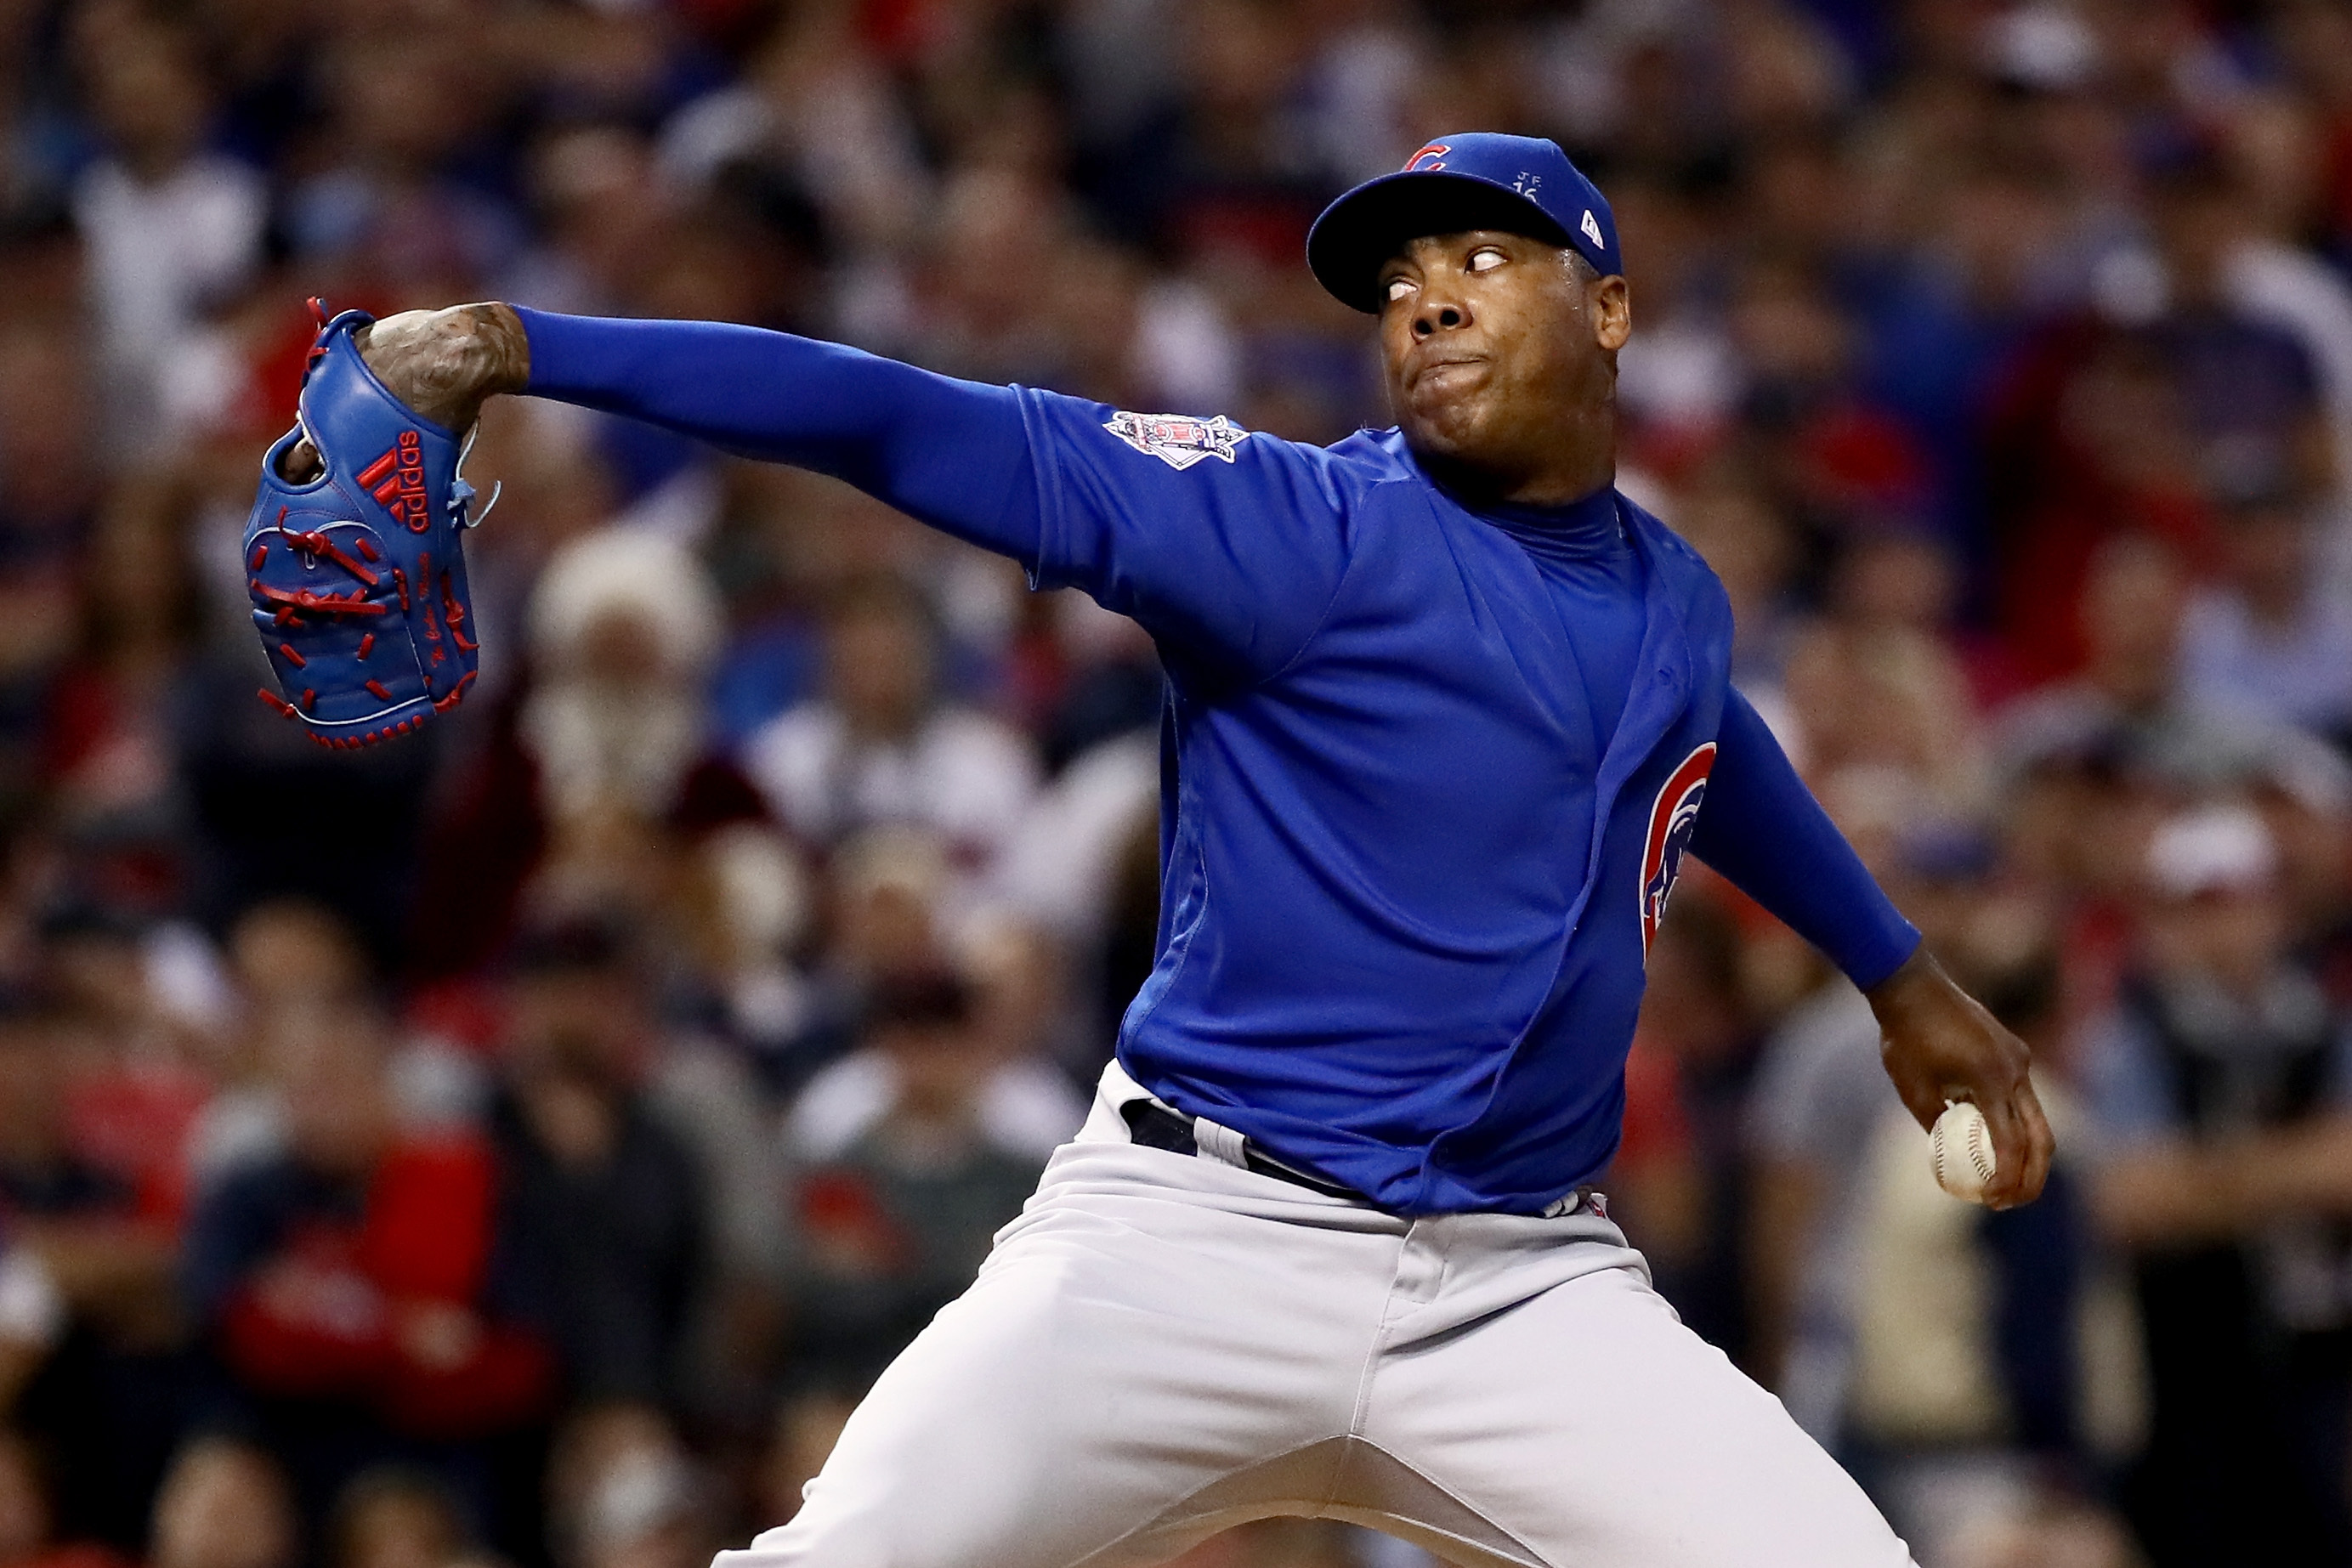 As prices rise for Aroldis Chapman and Kenley Jansen, Dodgers show